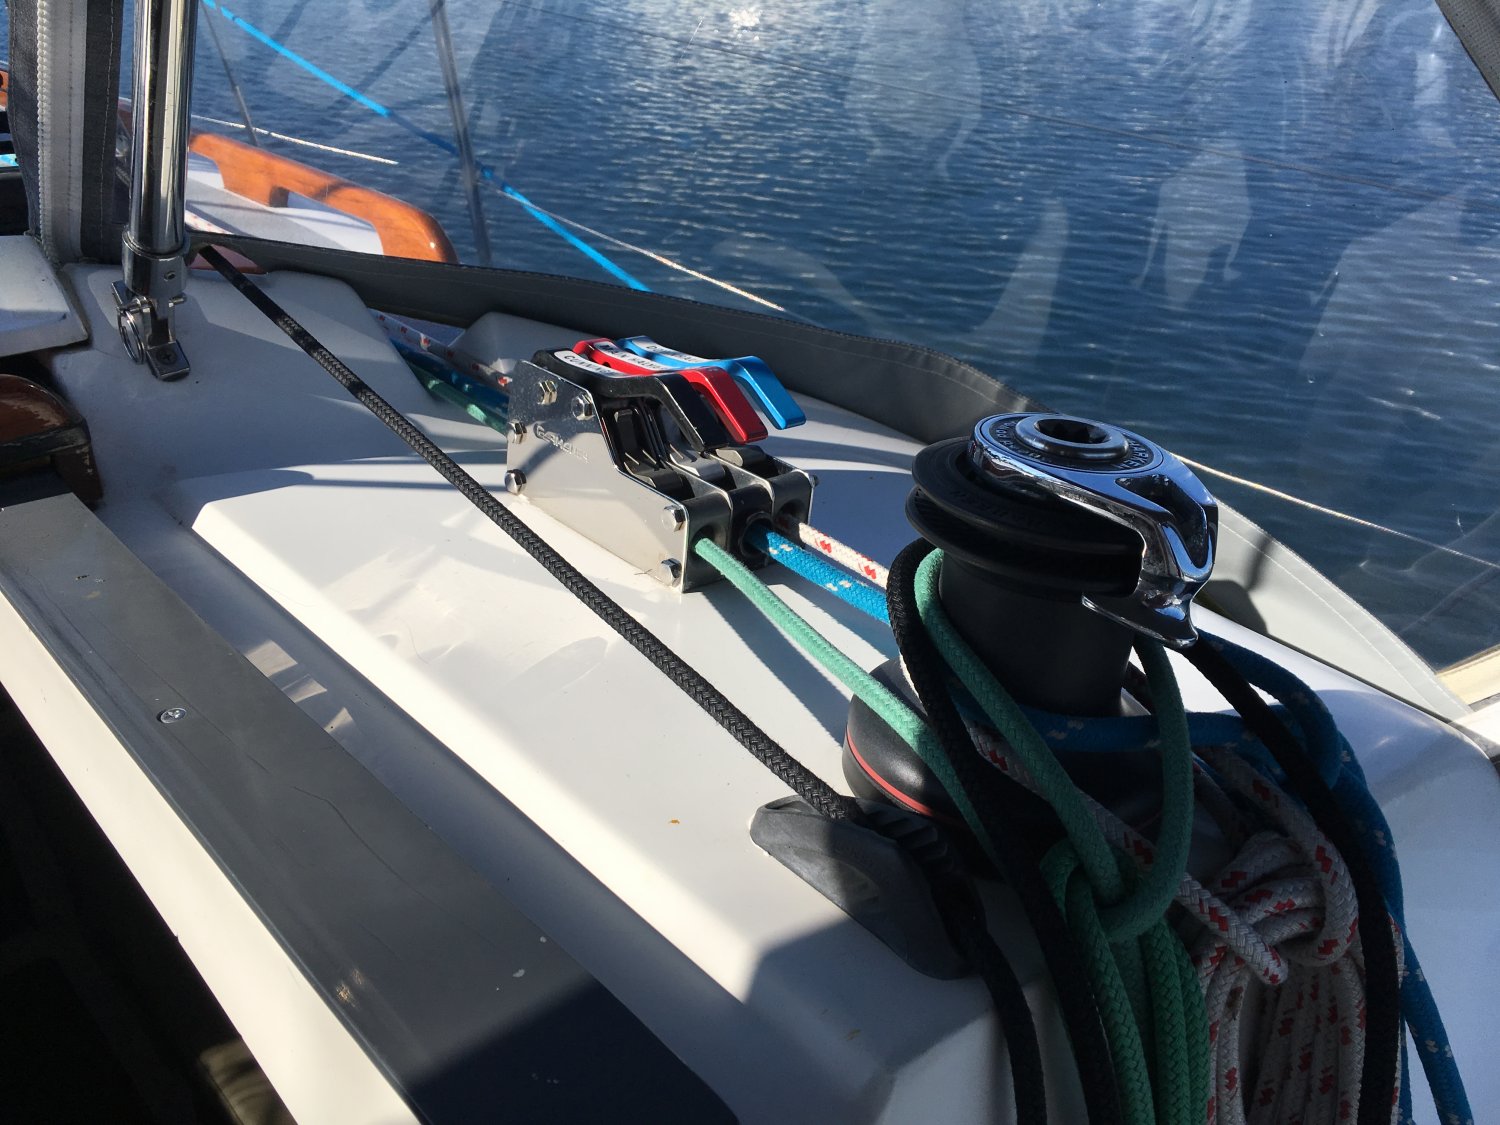 Cabintop winch & rope clutches